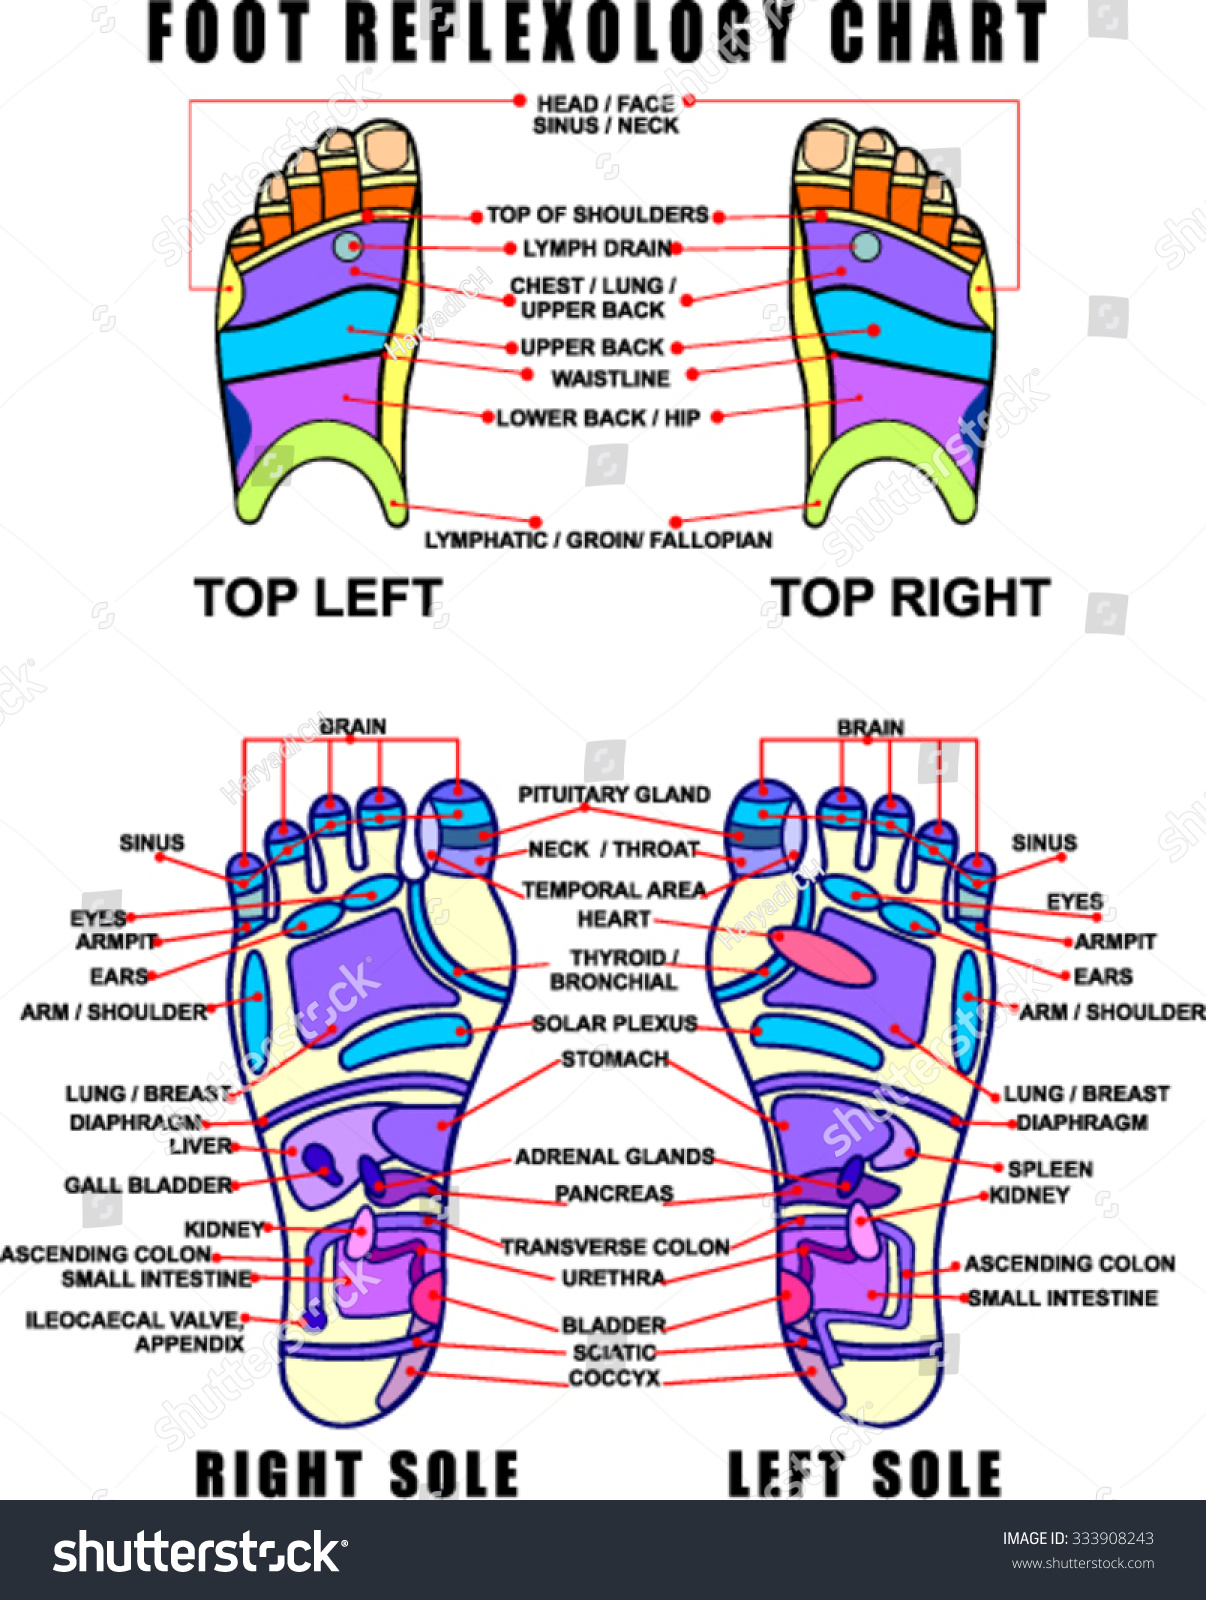 Foot Reflexology Chart With Accurate Description Royalty Free Stock Vector 333908243 